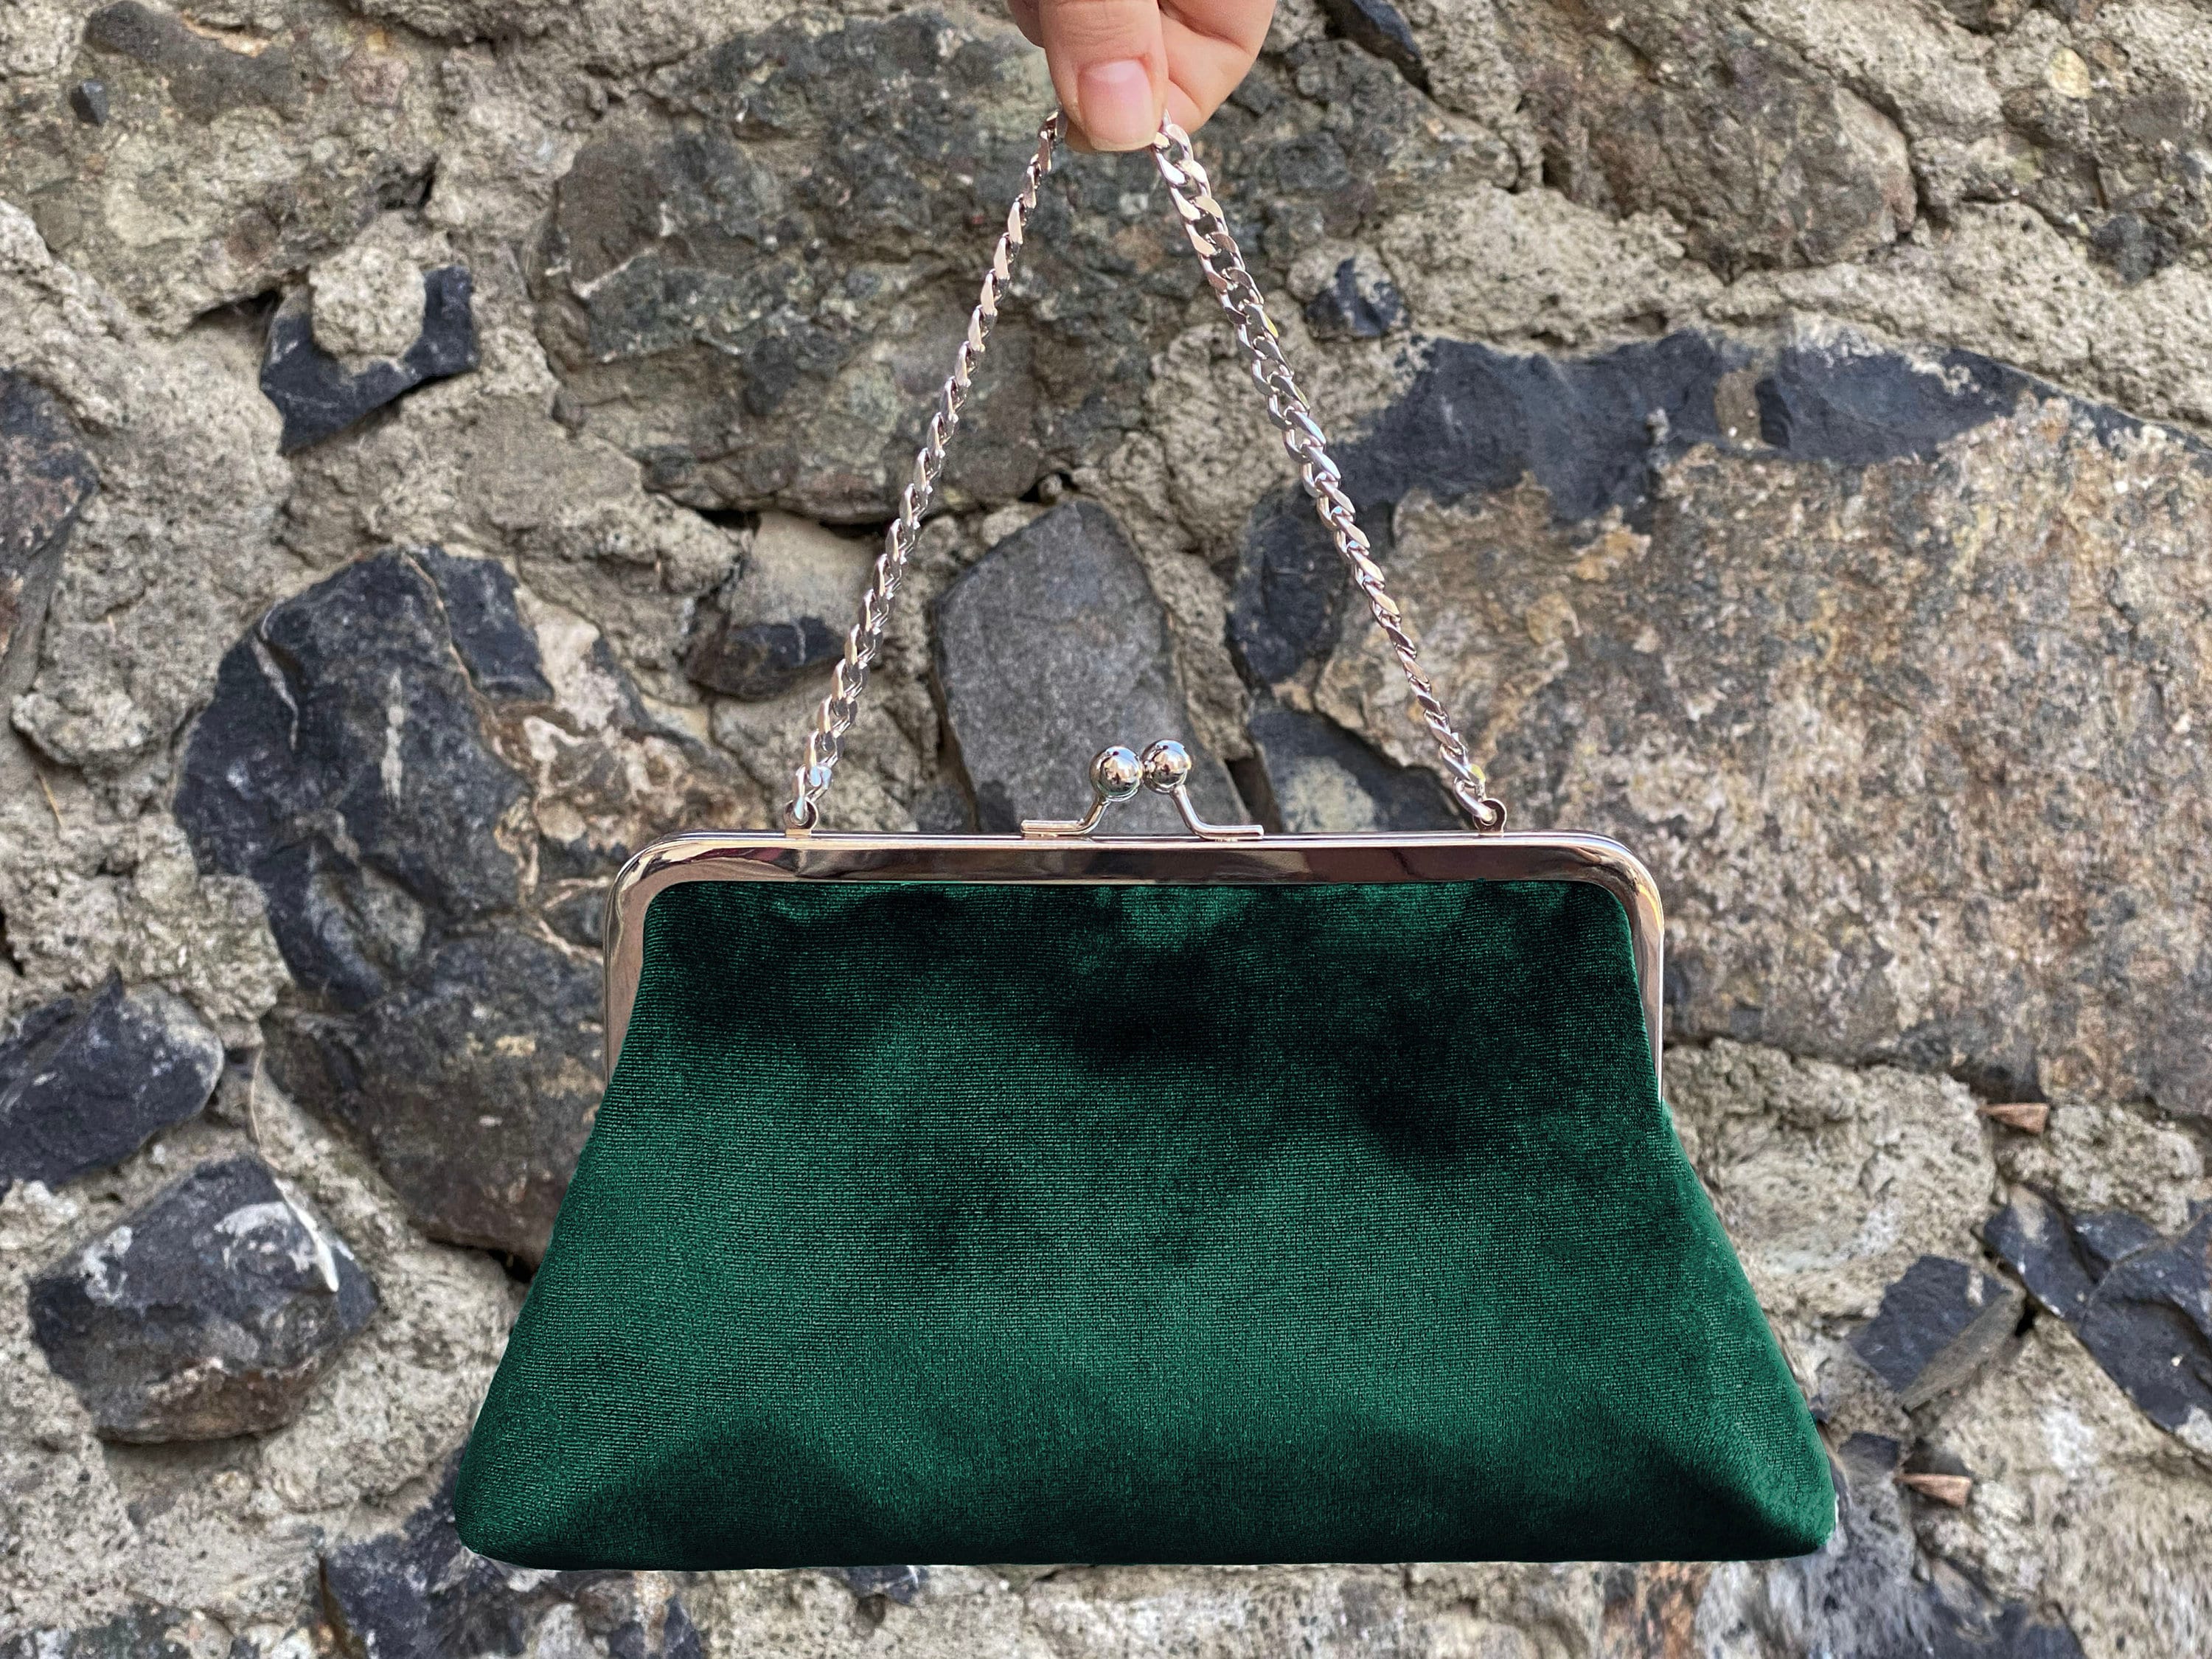 Velvet Emerald Green Clutch Purse, Bag Embroidered with Faux Diamonds, Shoulder Strap and Handle for Wedding, Evening Party and Ethnic Wear.